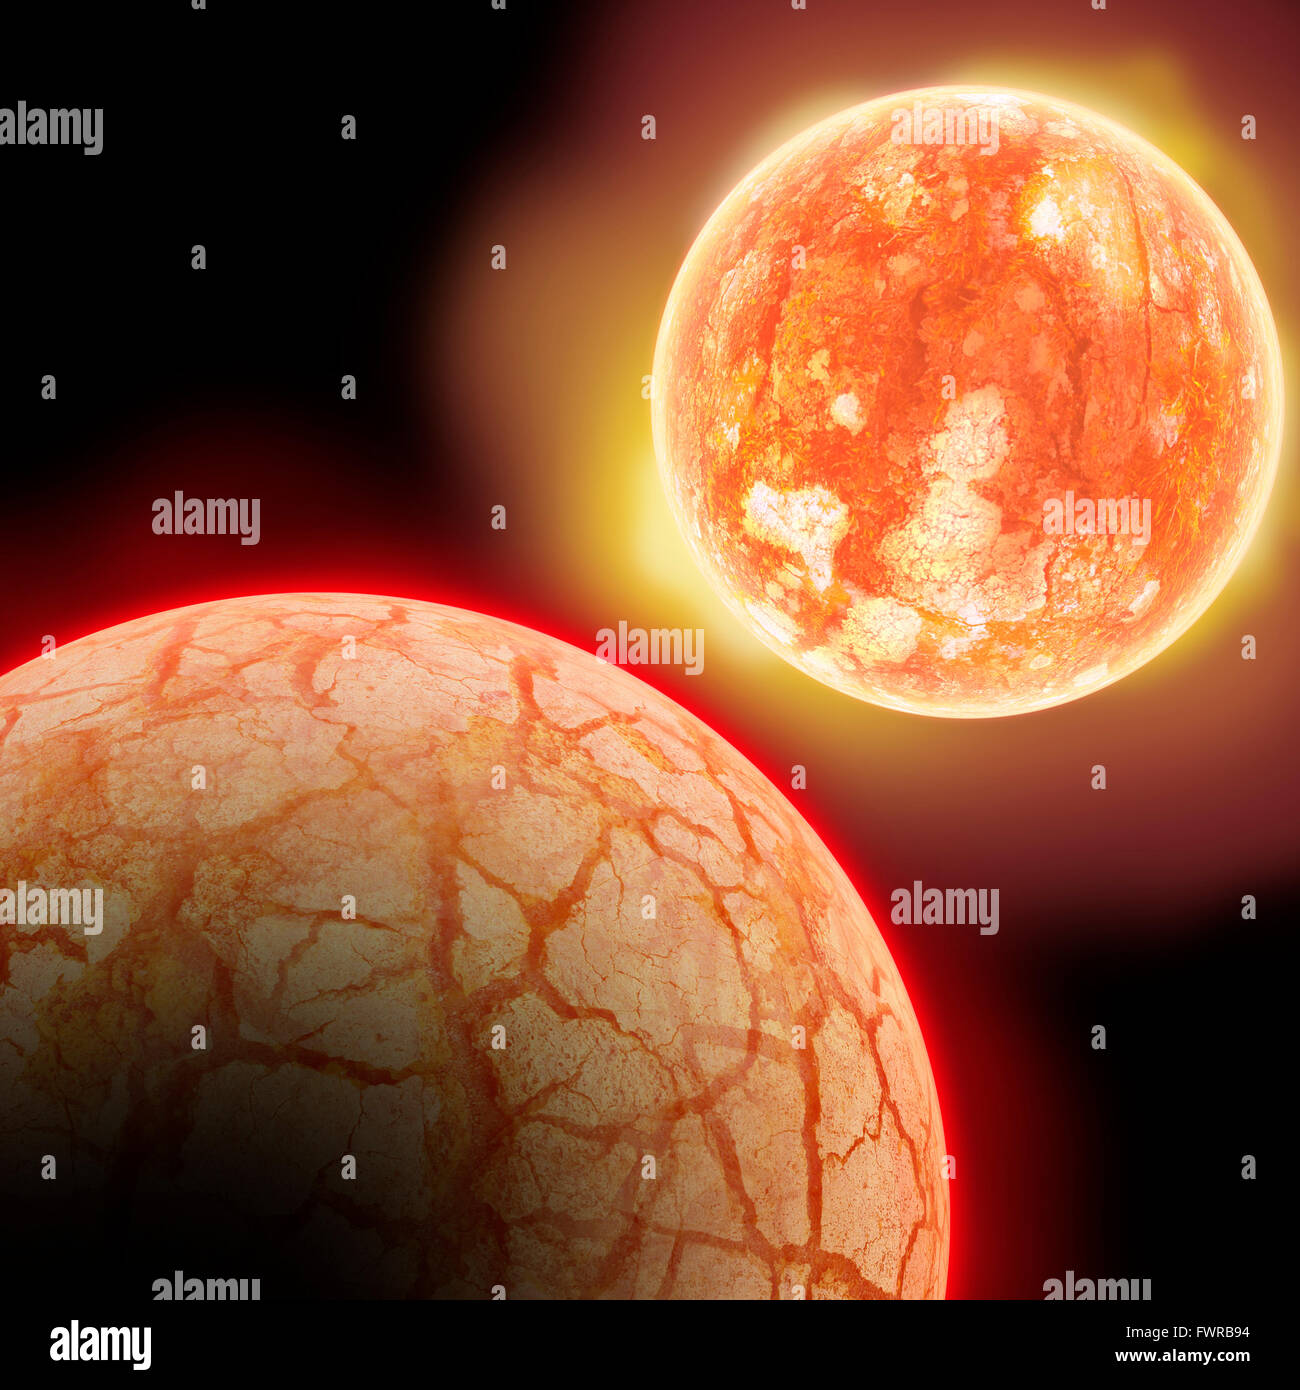 Desert planet and red-hot sun in space Stock Photo